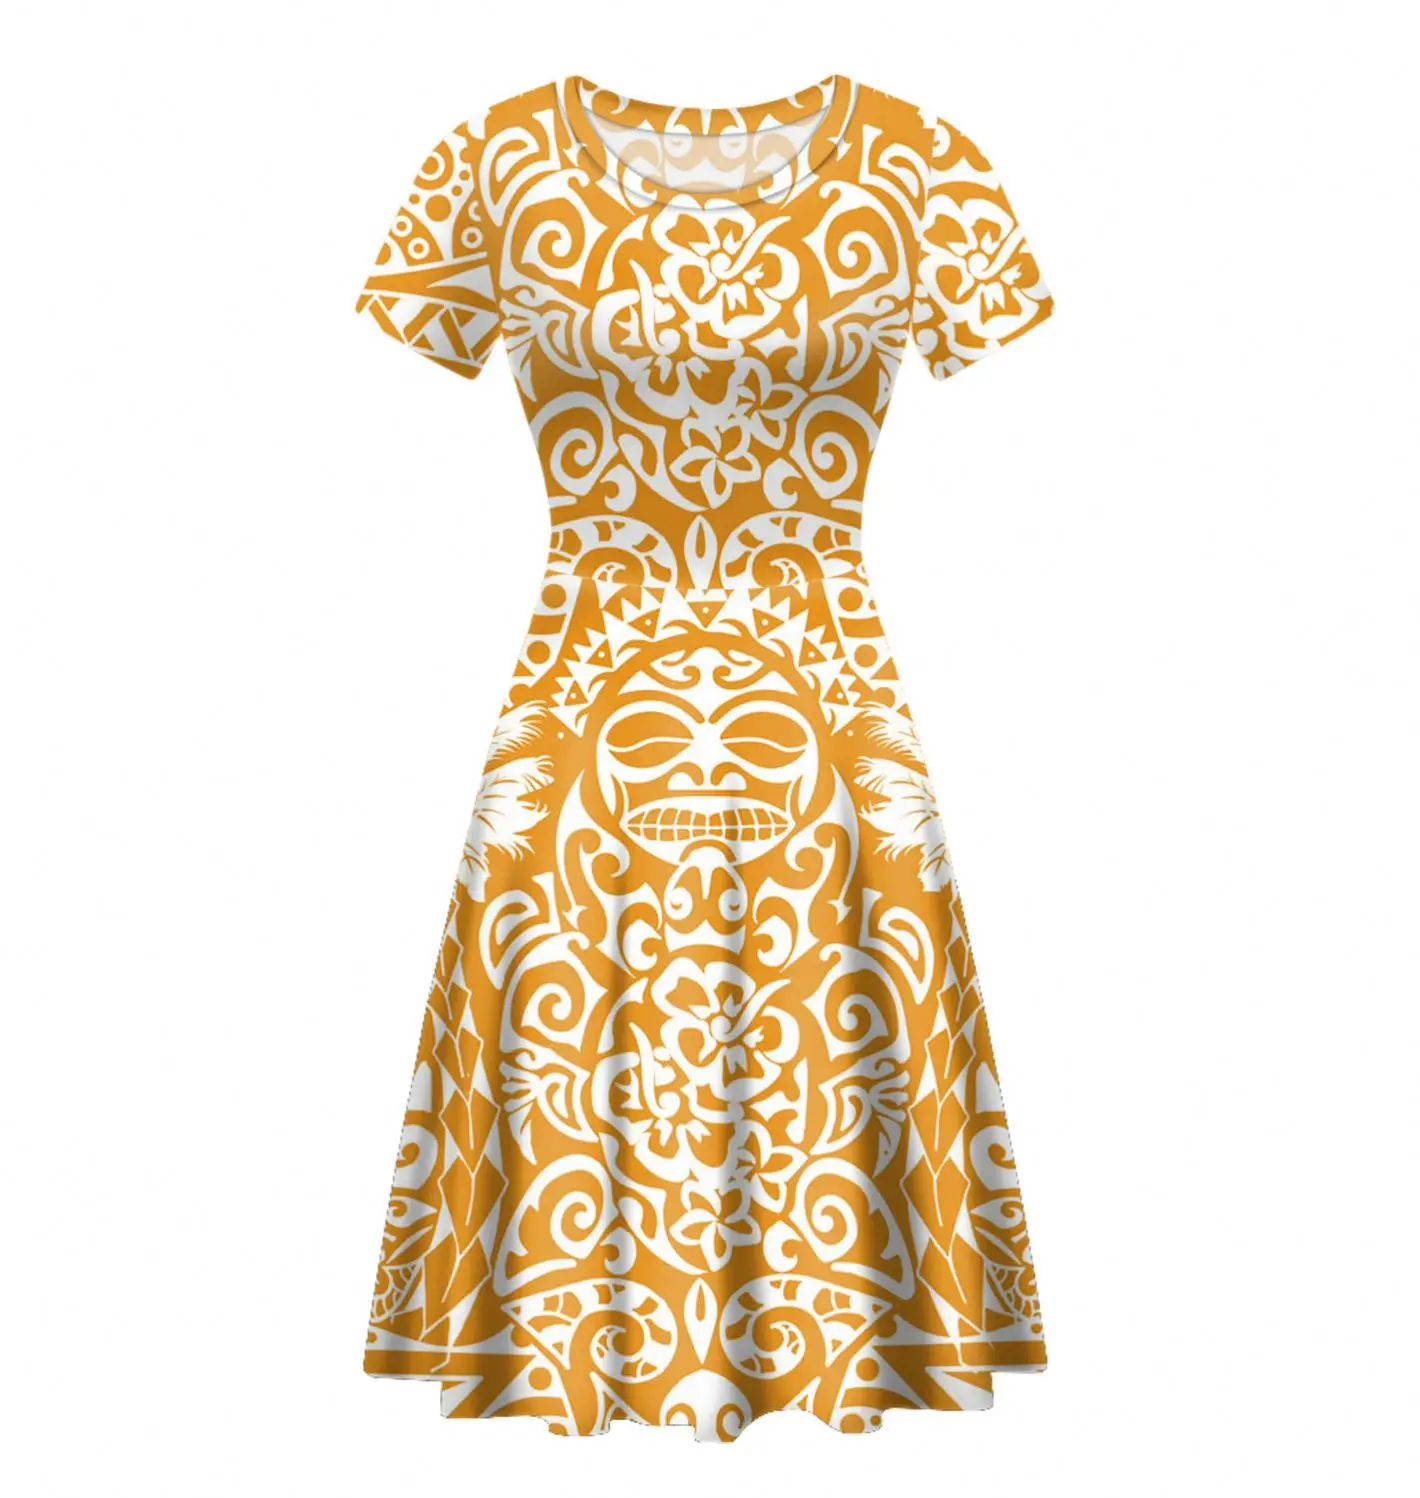 Custom Design Yellow Polynesian Traditional Tribal Printed Evening Short Dresses Wholesale One Piece Dresses Women Summer Sexy Buy One Piece Dress Evening Short Dresses Dresses Women Summer Sexy Product On Alibaba Com